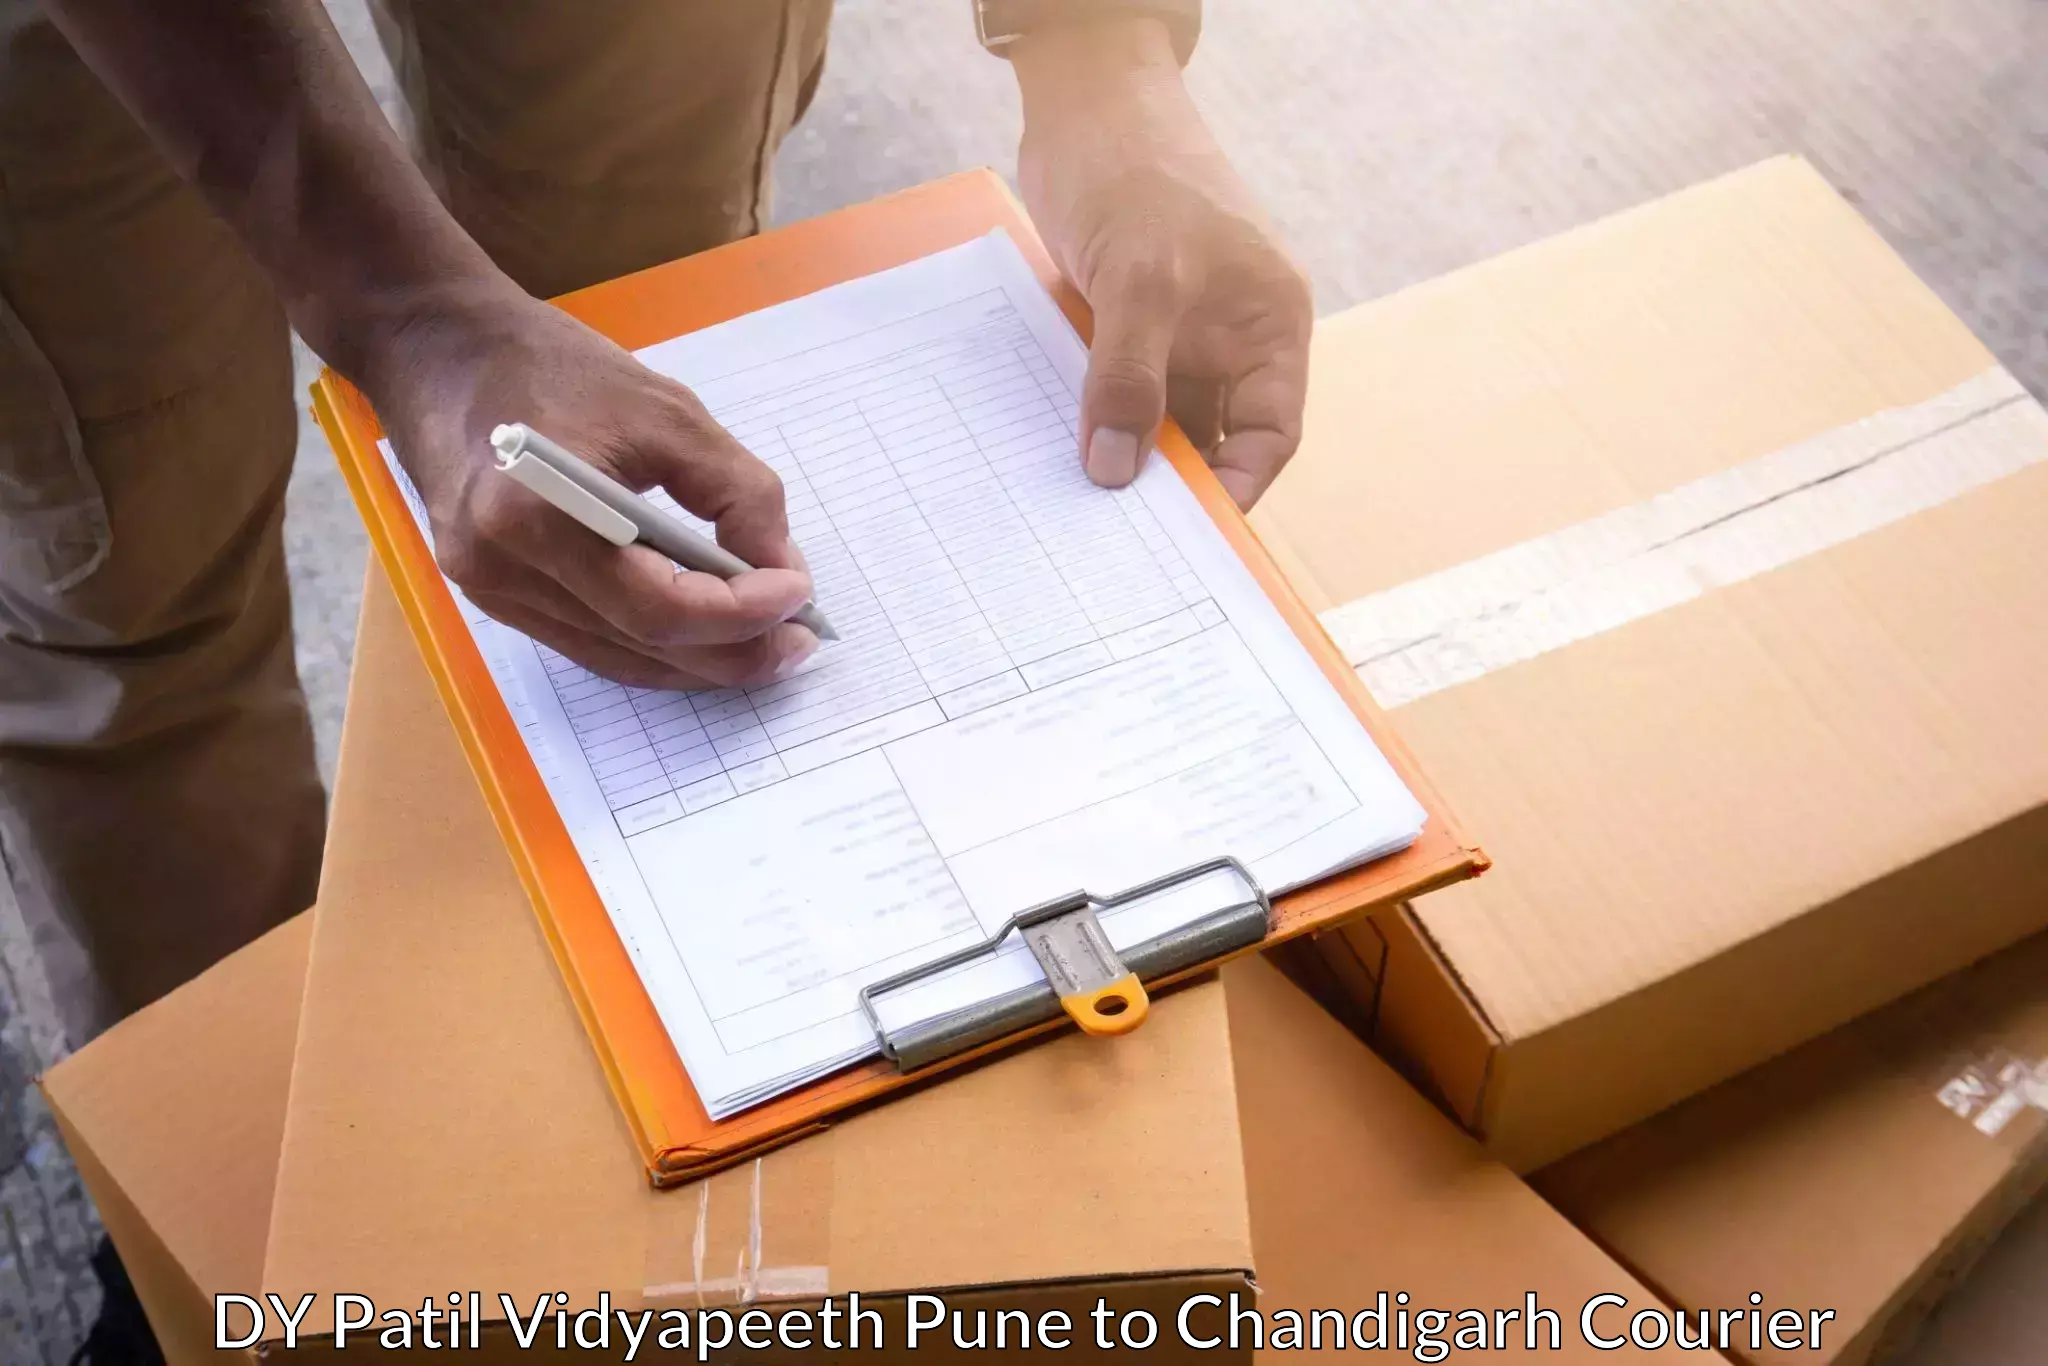 Reliable parcel services DY Patil Vidyapeeth Pune to Panjab University Chandigarh